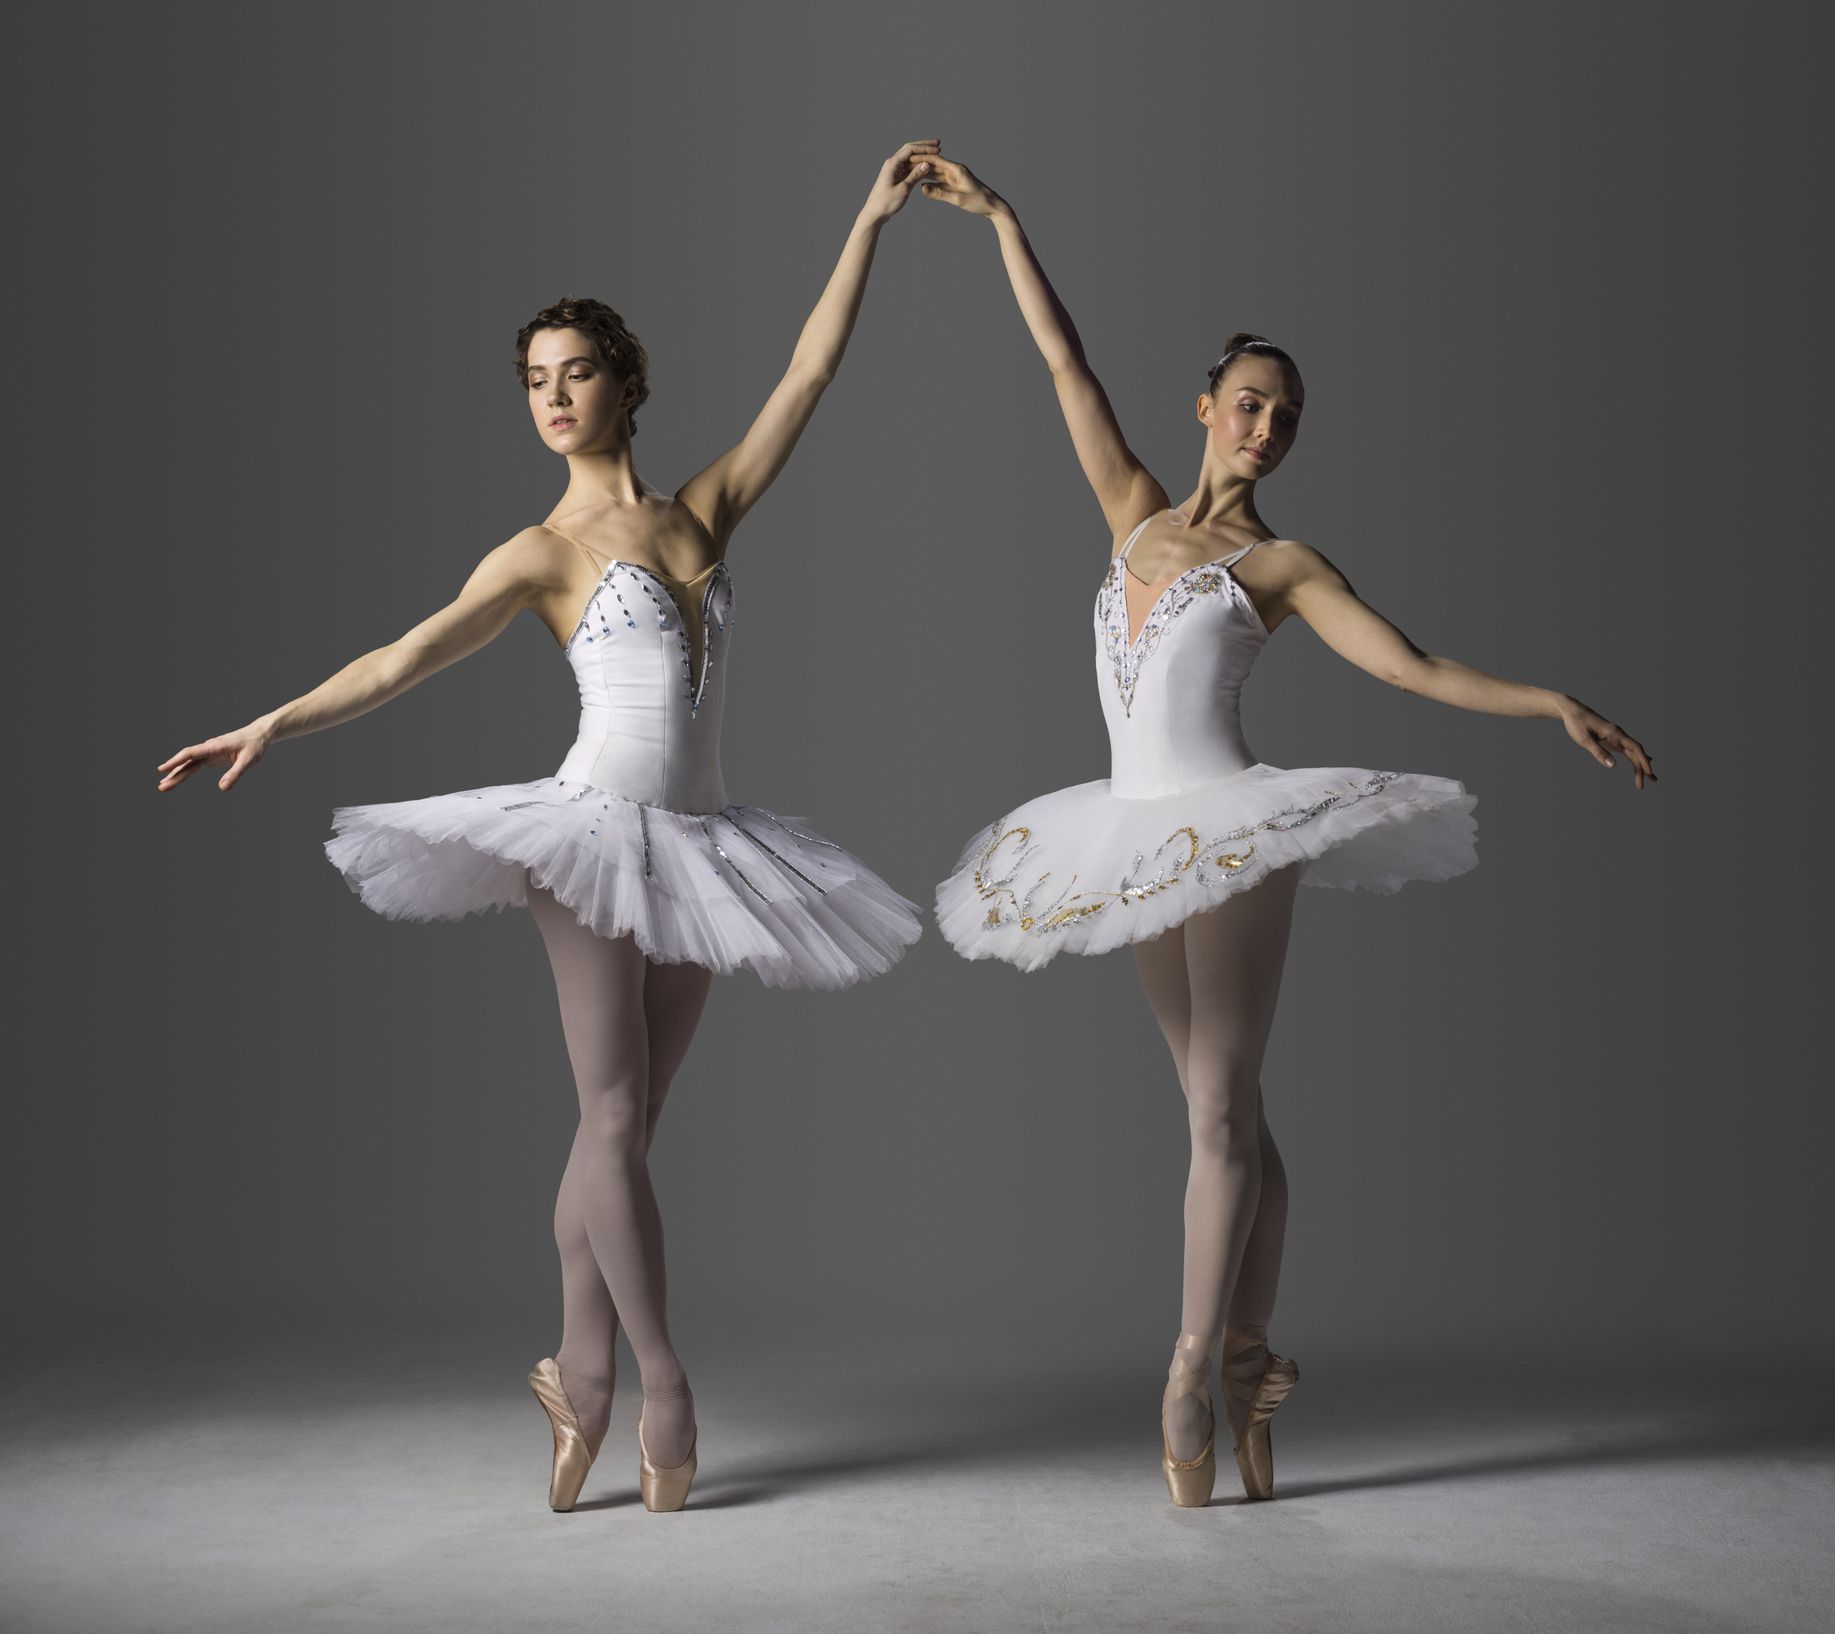 11 Things You Didn't Know About the Life of a Ballet Dancer